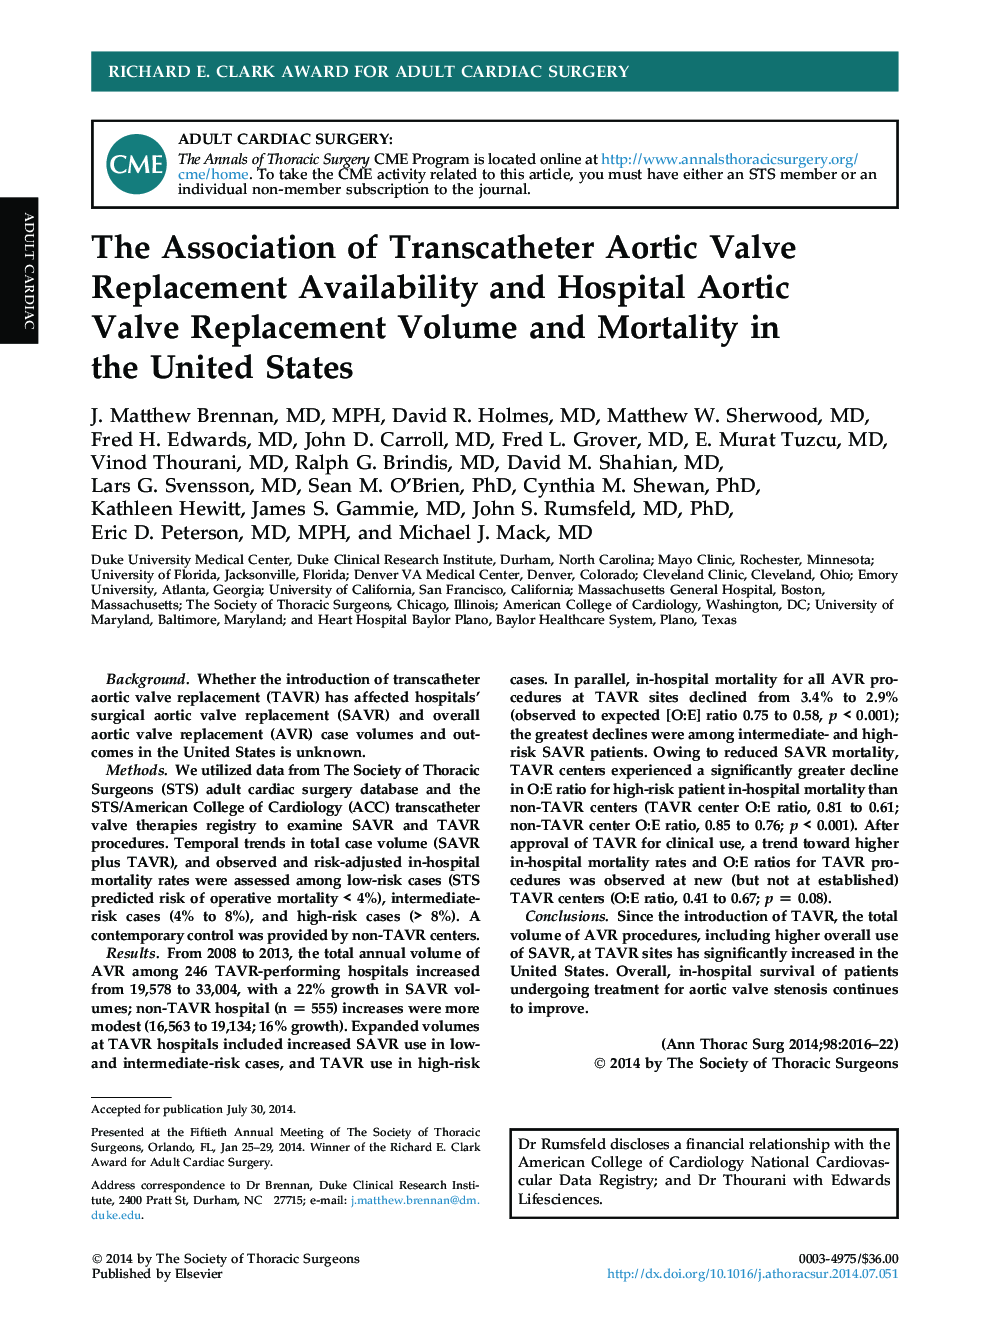 The Association of Transcatheter Aortic Valve Replacement Availability and Hospital Aortic ValveÂ Replacement Volume and Mortality in theÂ United States